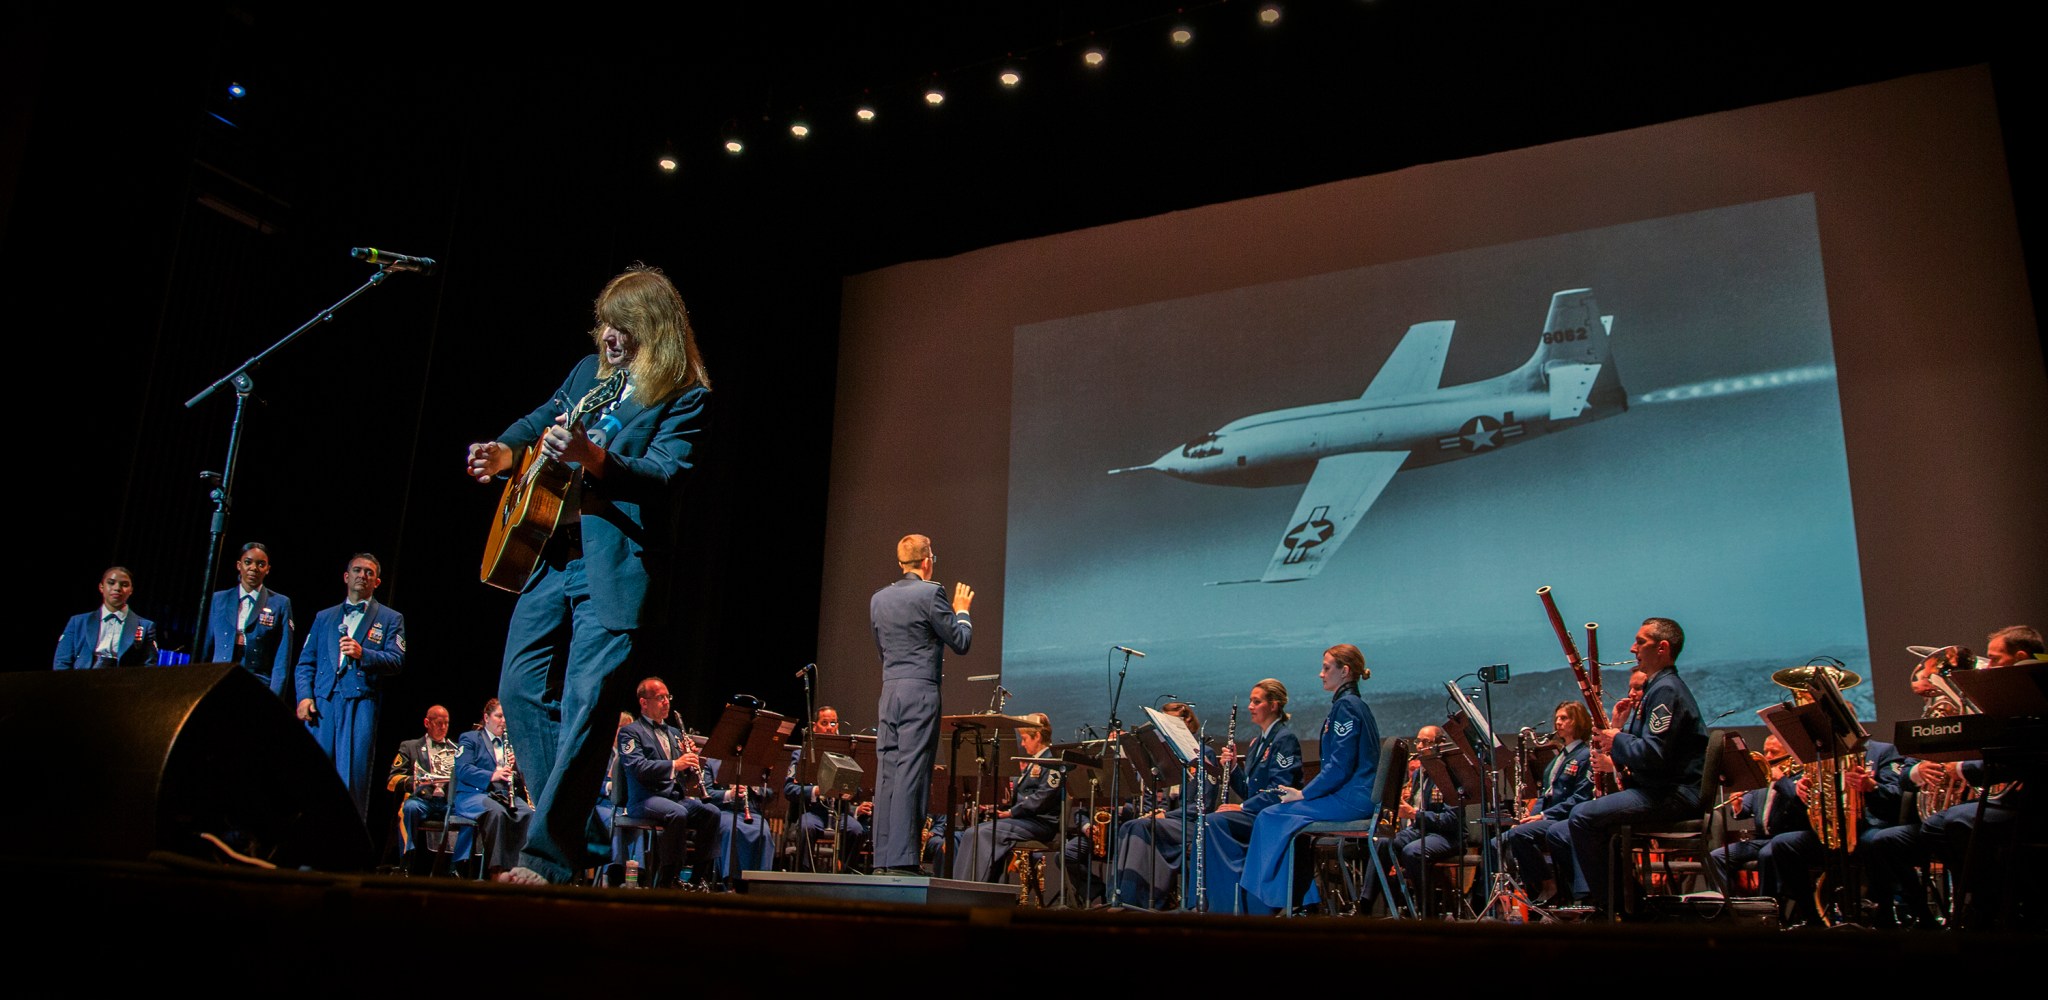 Musician Karl Werne, backed by the U.S. Air Force Heritage of America Concert Band, performs an original song.